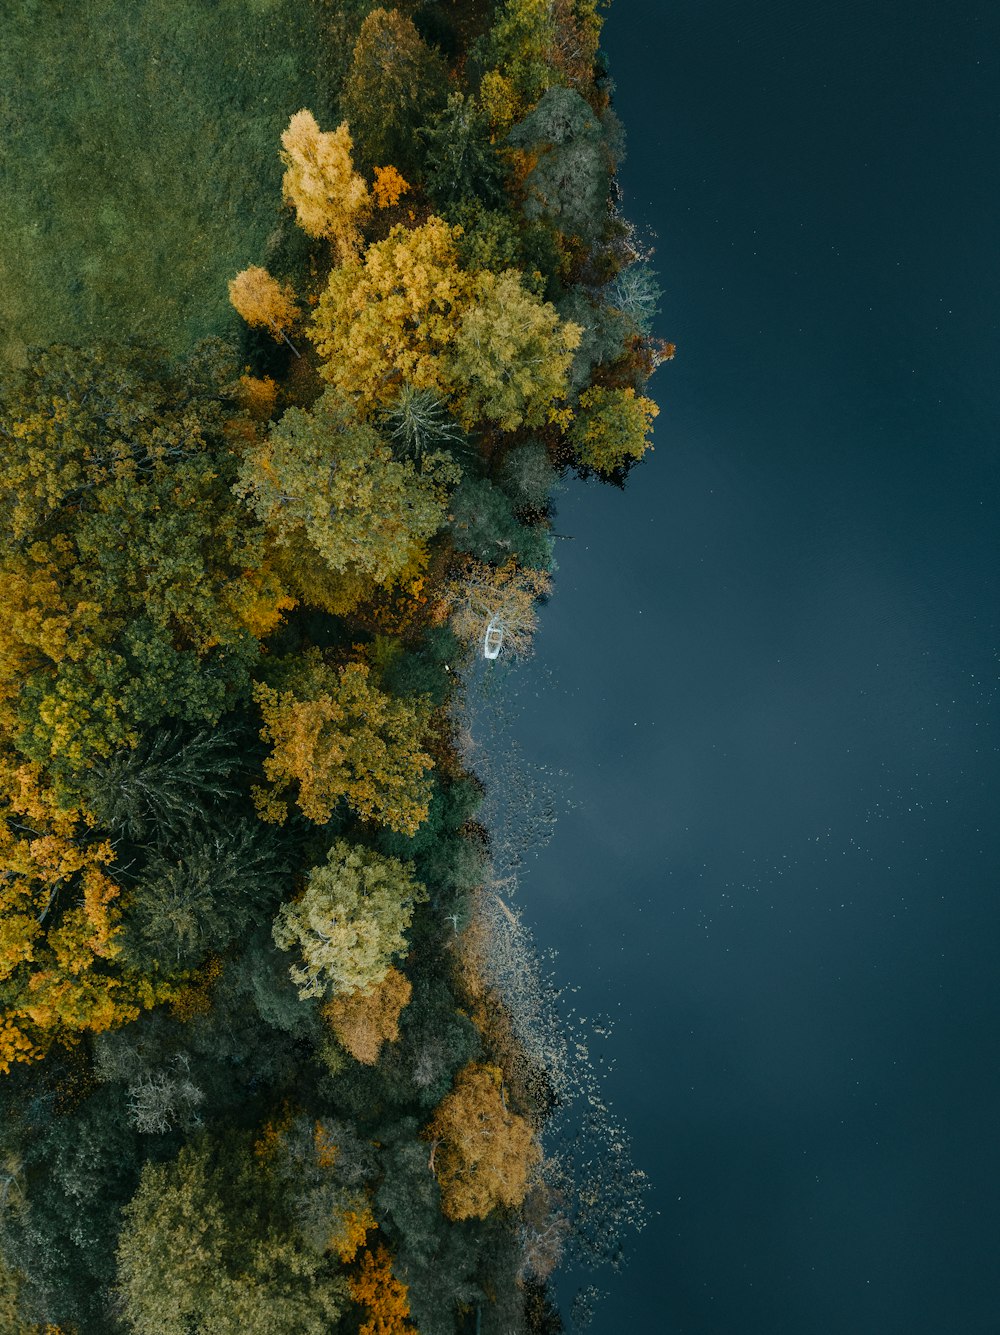 a bird's eye view of trees and a body of water